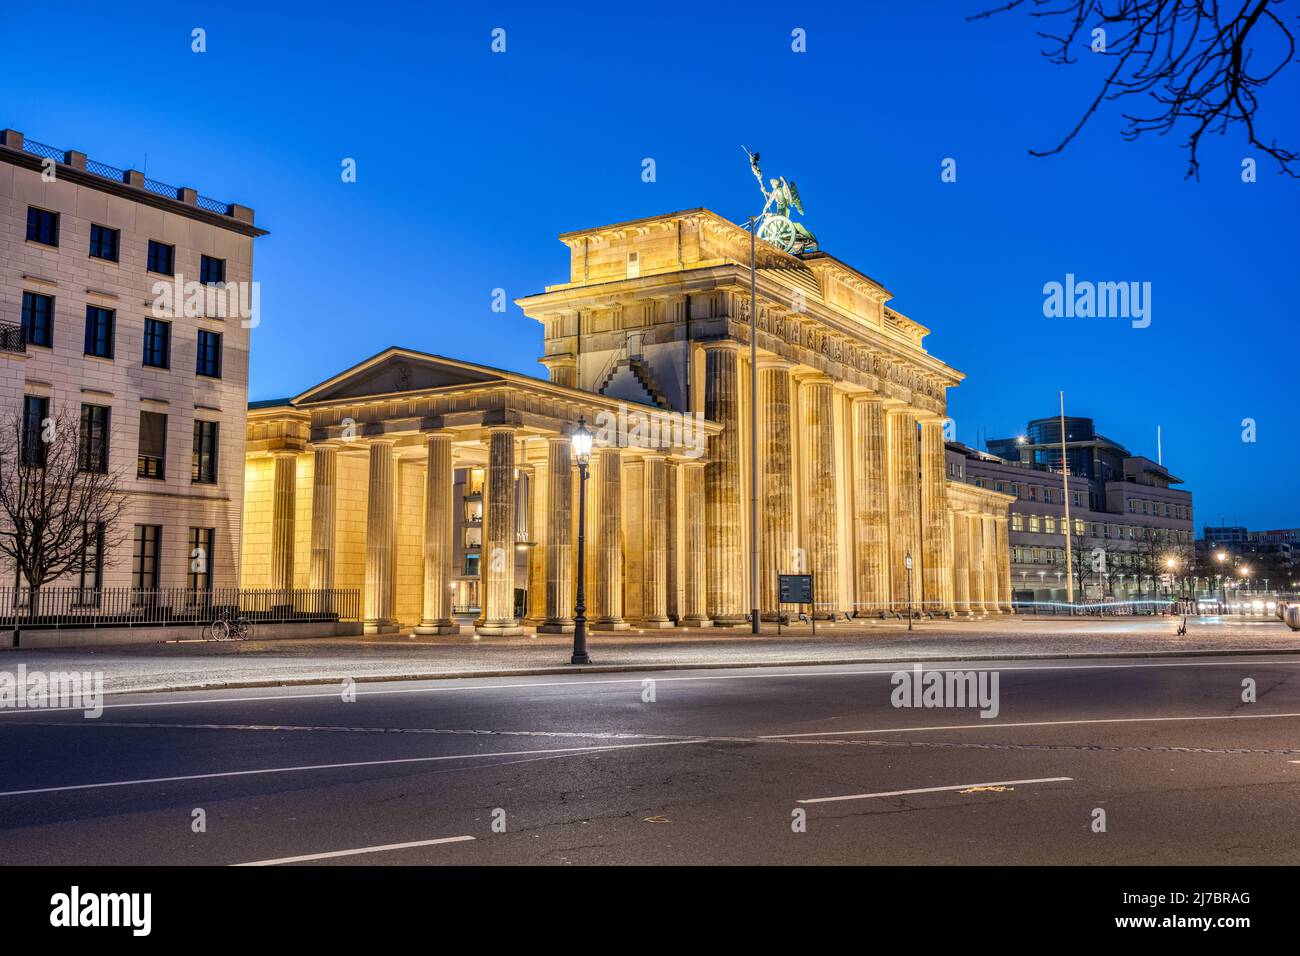 The backside of the famous Brandenburg Gate in Berlin at dawn Stock Photo